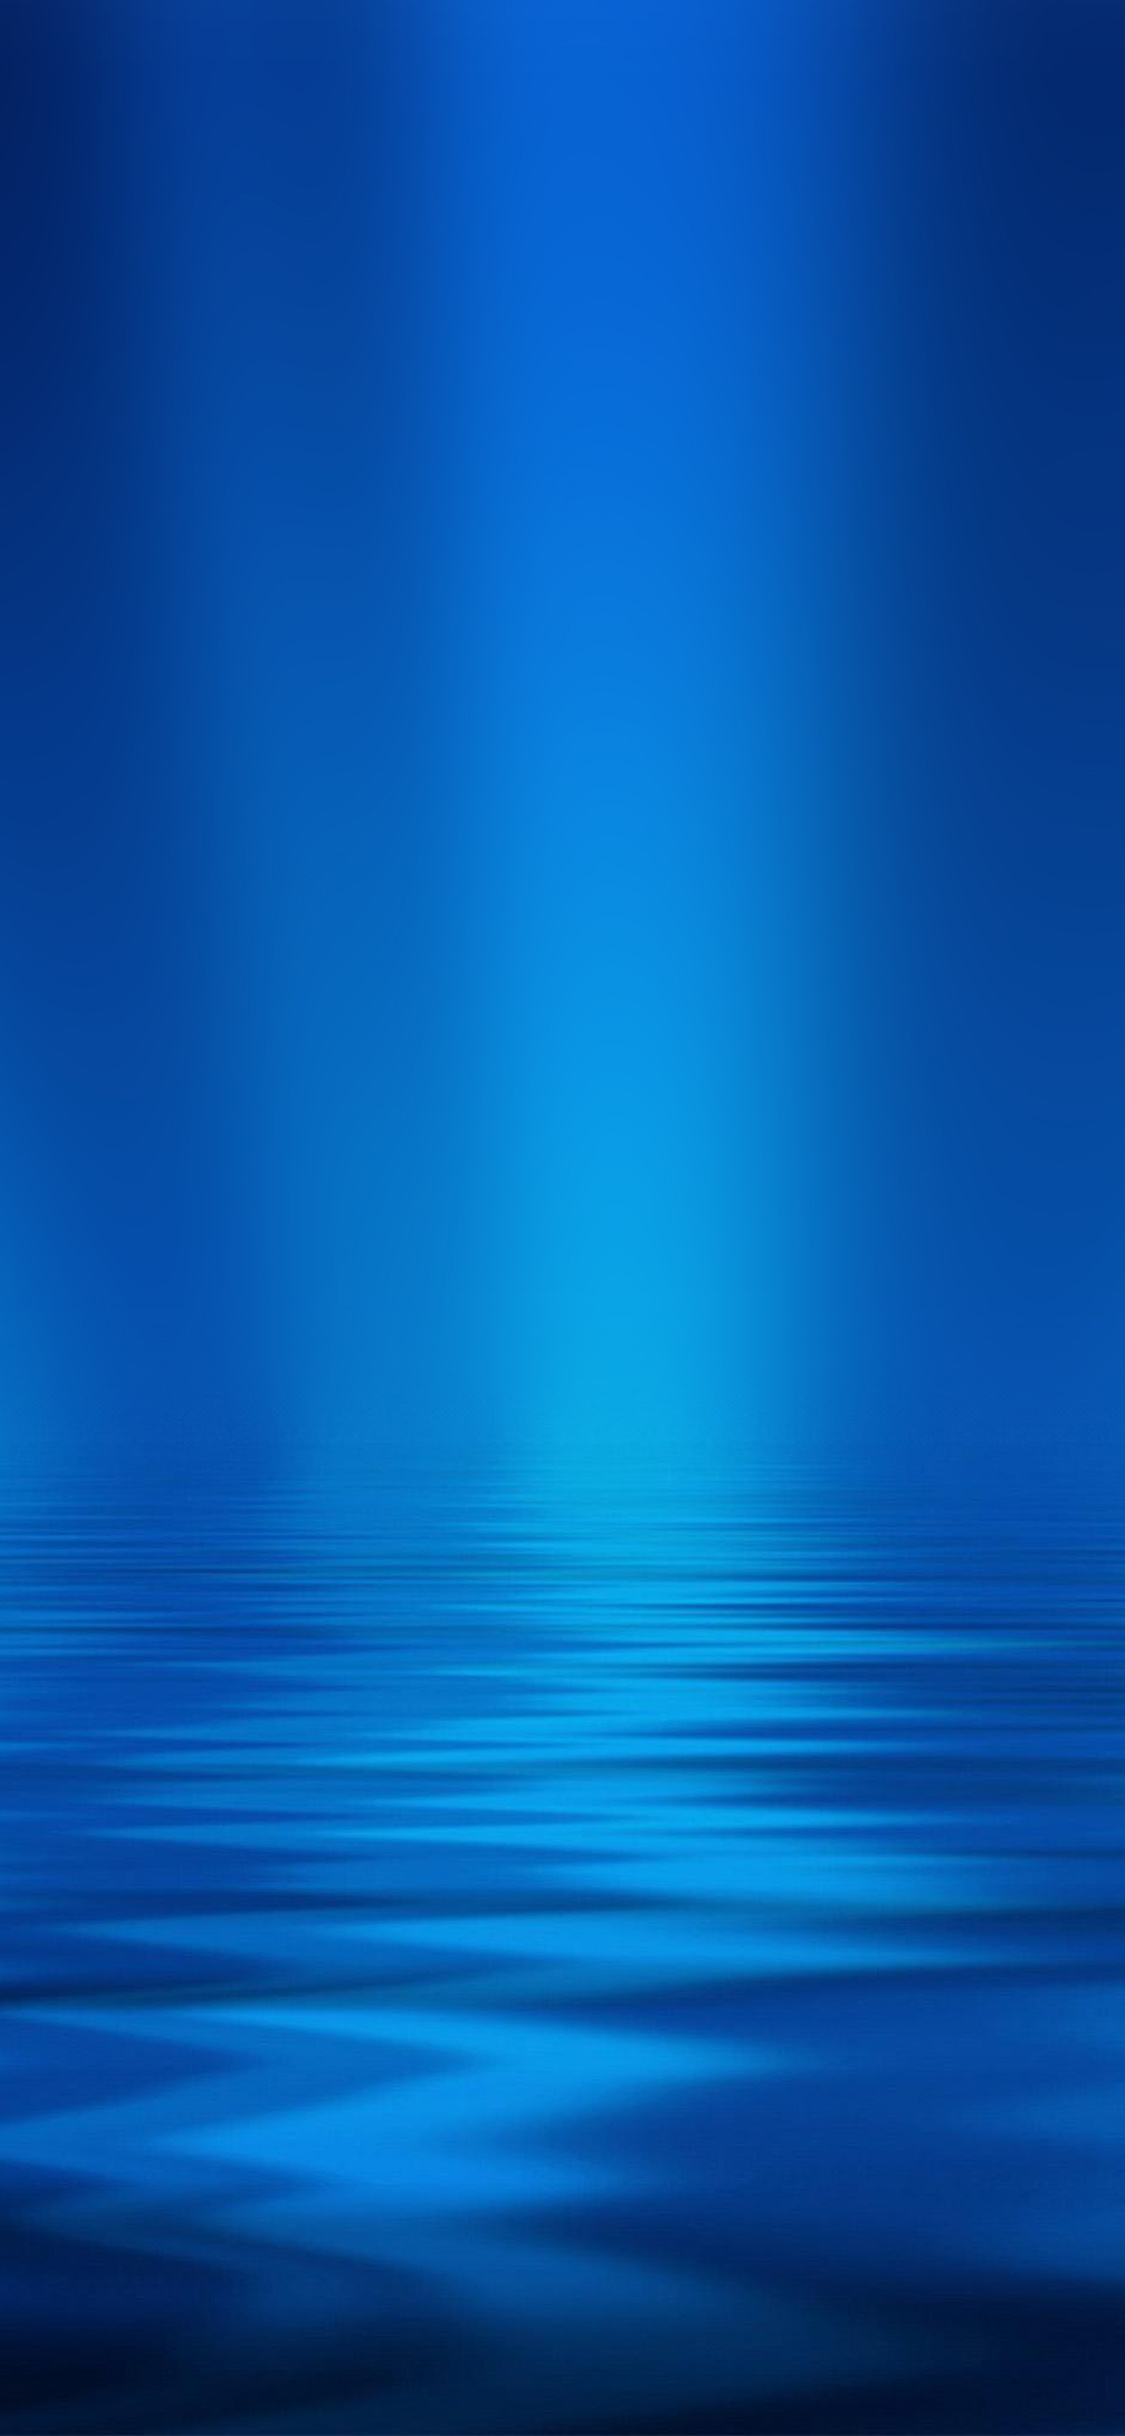 Sea blue ripple pattern iPhone X Wallpapers Free Download